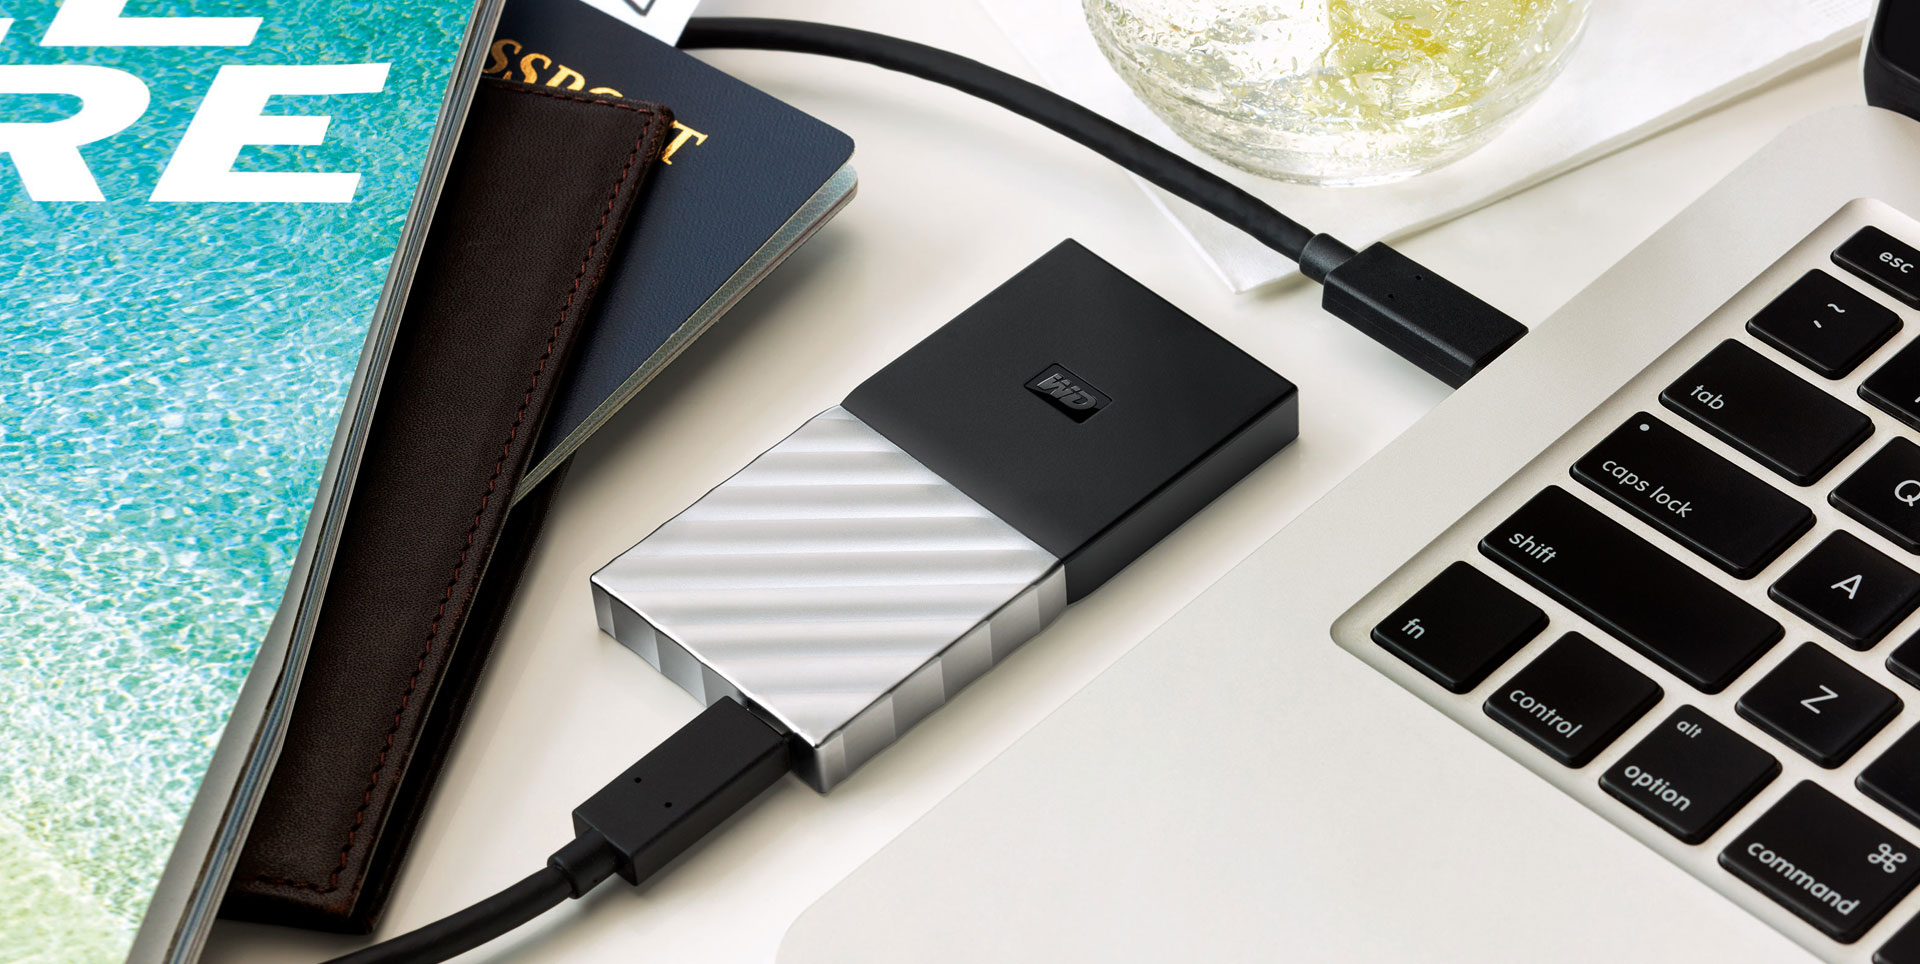 Western Digital Launches World's First USB-C Portable External SSD Ready